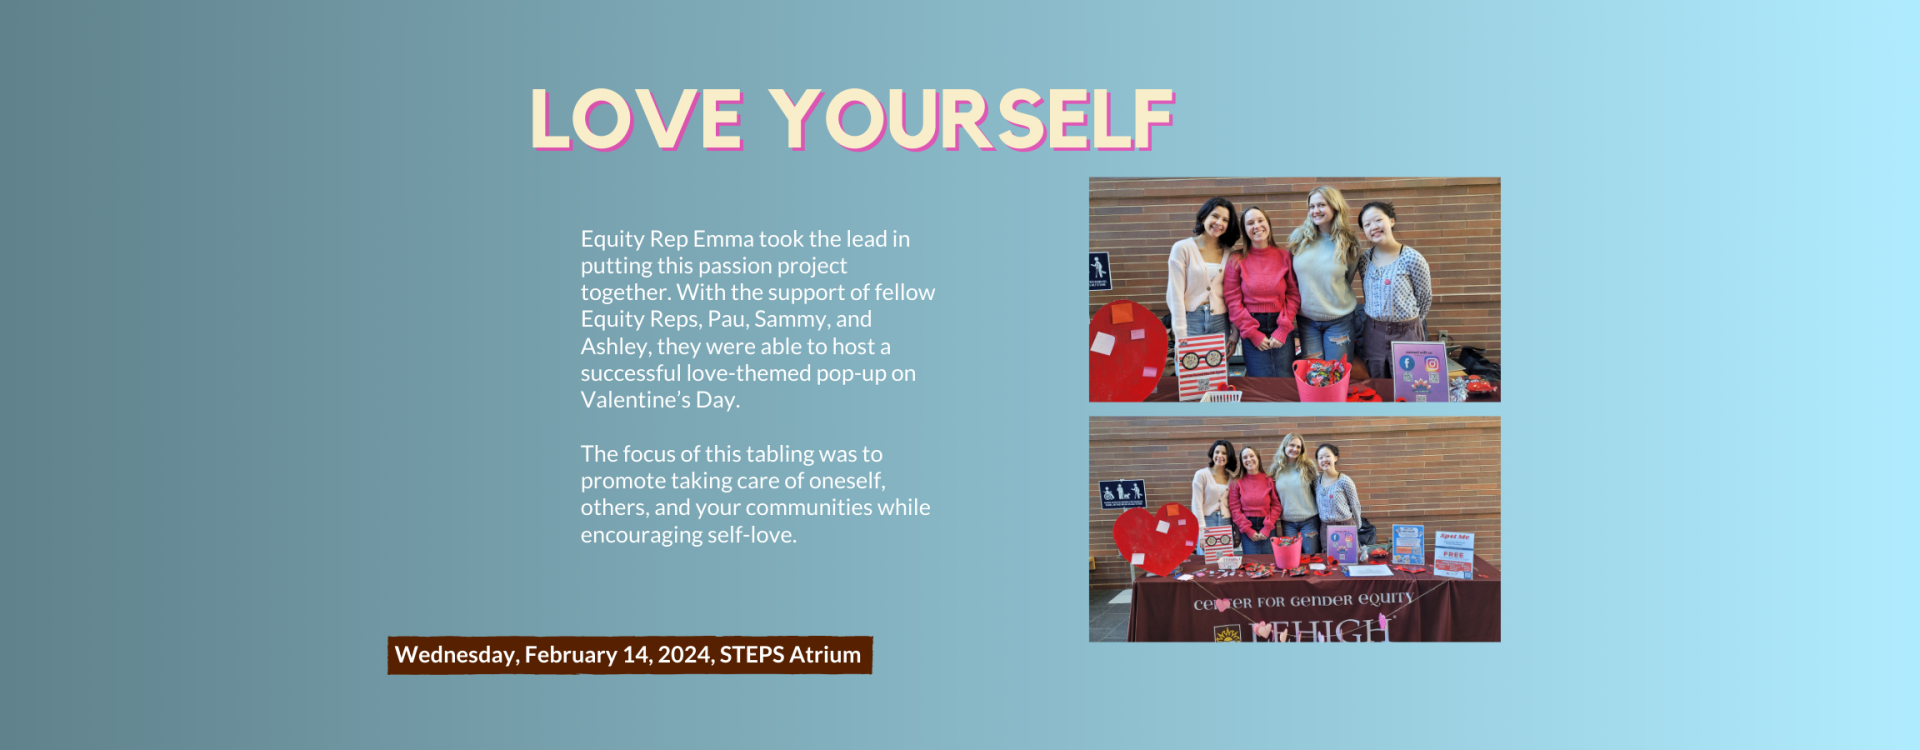 Love yourself: Equity Rep Emma took the lead in putting this passion project together. With the support of fellow Equity Reps, Pau, Sammy, and Ashley, they were able to host a successful love-themed pop-up on Valentine’s Day.   The focus of this tabling was to promote taking care of oneself, others, and your communities while encouraging self-love.